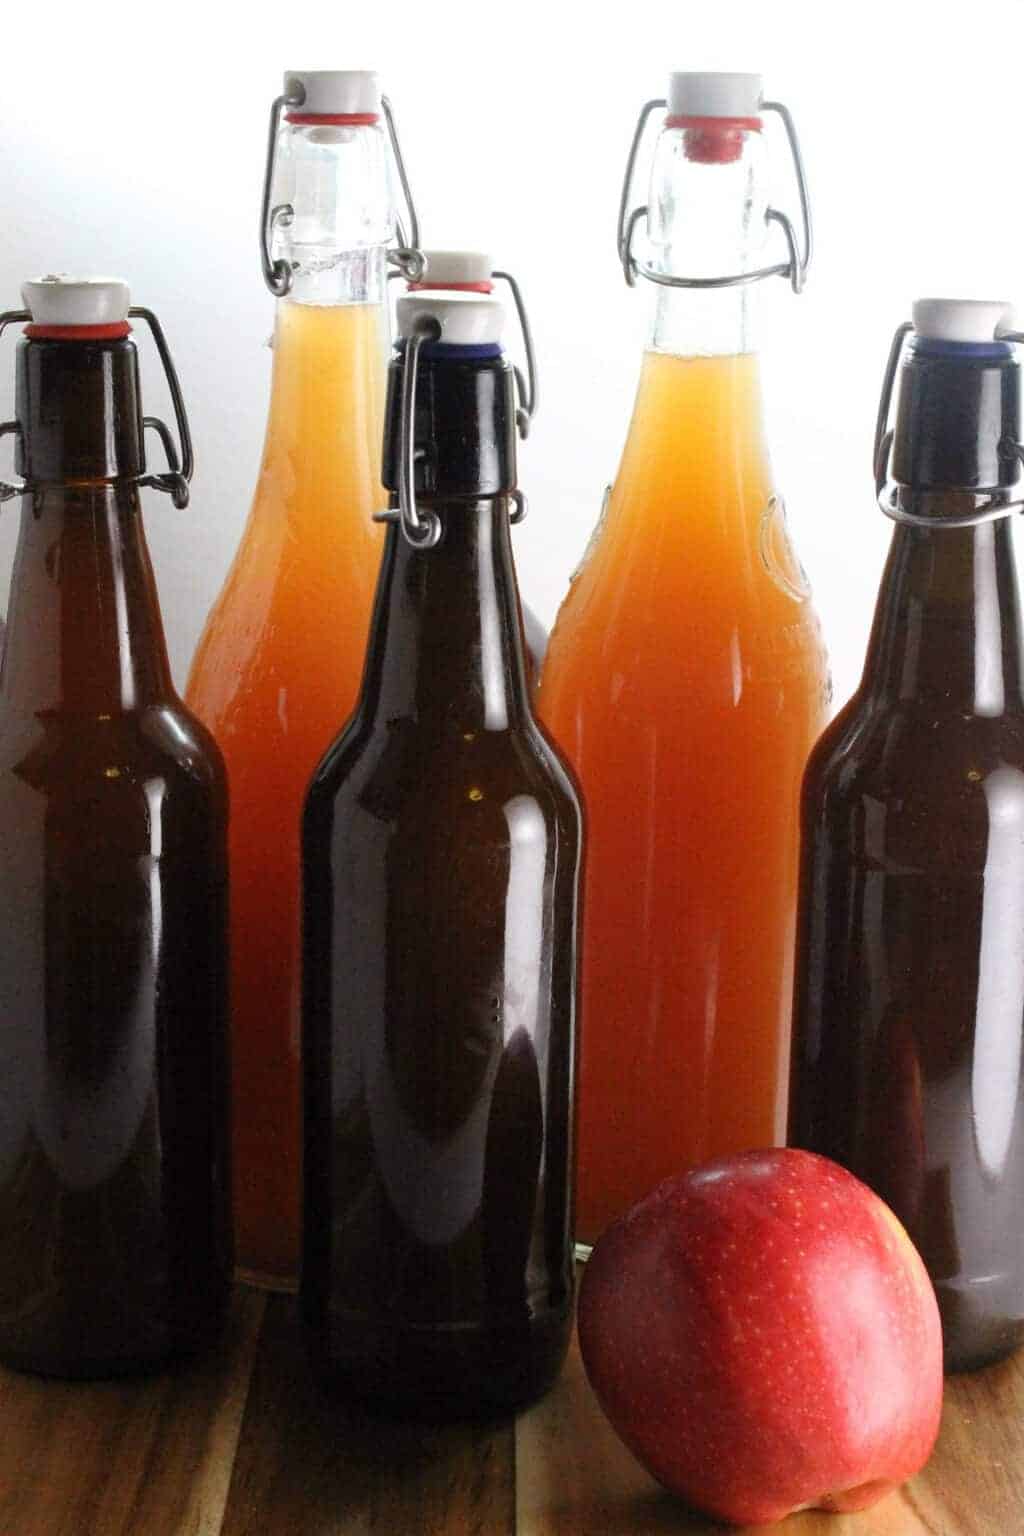 A great way to store homem made apple cider is in old pop top beer bottles!